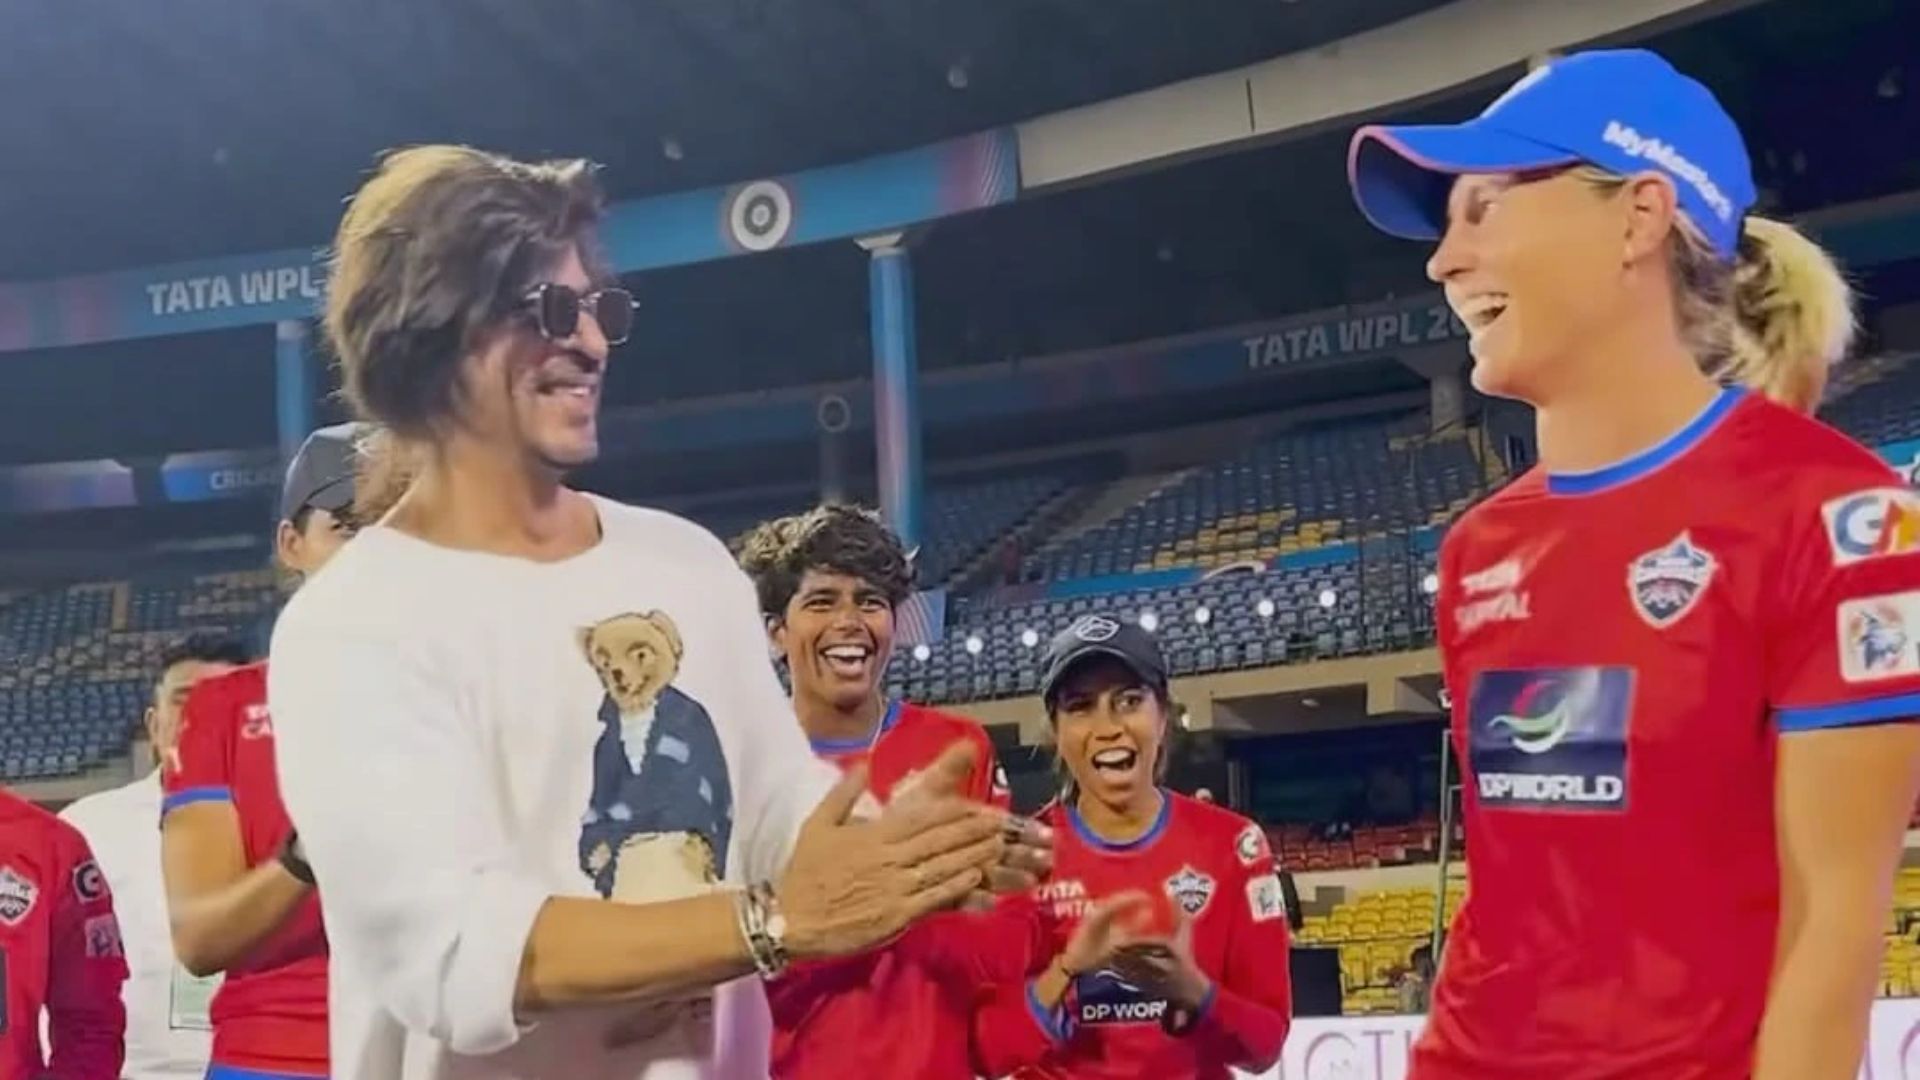 Shah Rukh Khan Embraces and Blesses Delhi Capitals, Mumbai Indians Players Ahead of WPL; Imparts Iconic Pose Lesson to Meg Lanning